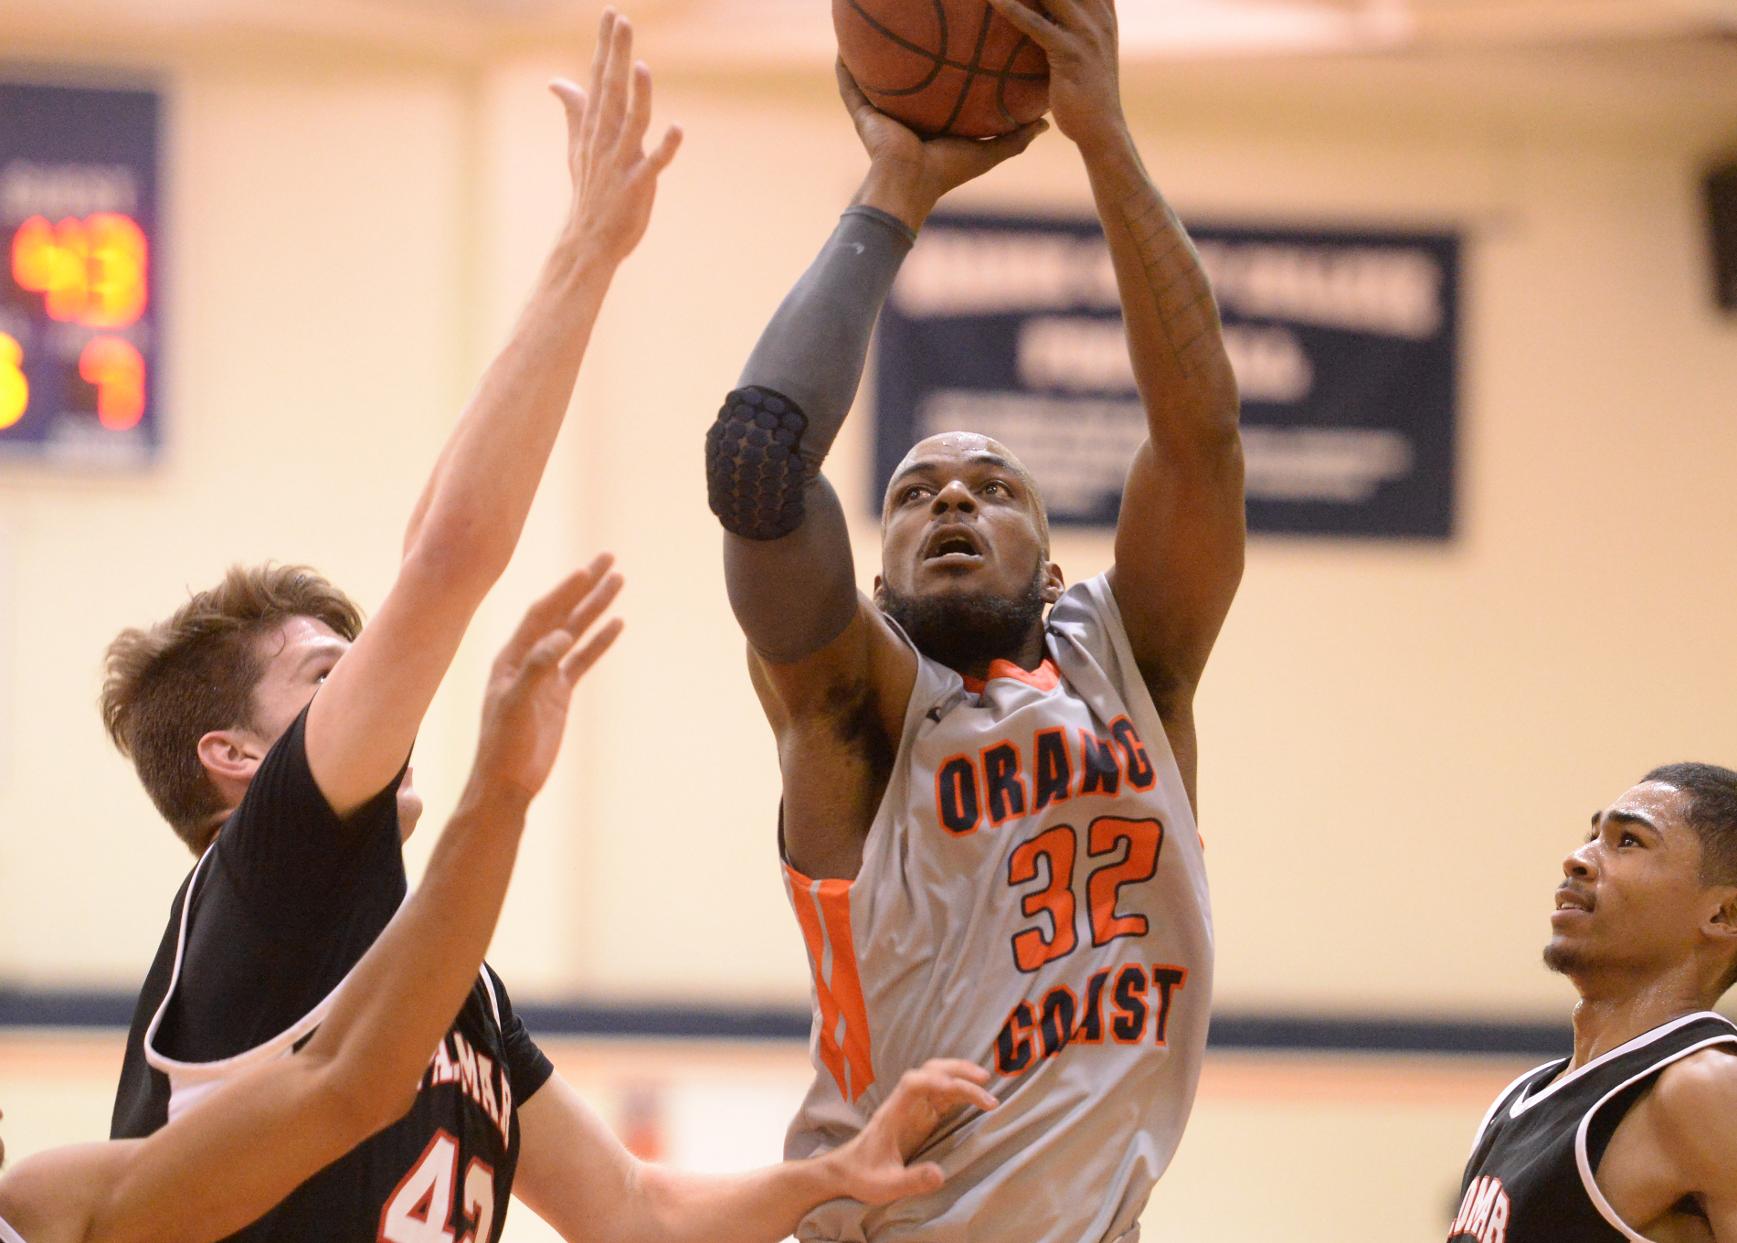 Pirate standout Jamaal Lee earns first-team, All-OEC honors